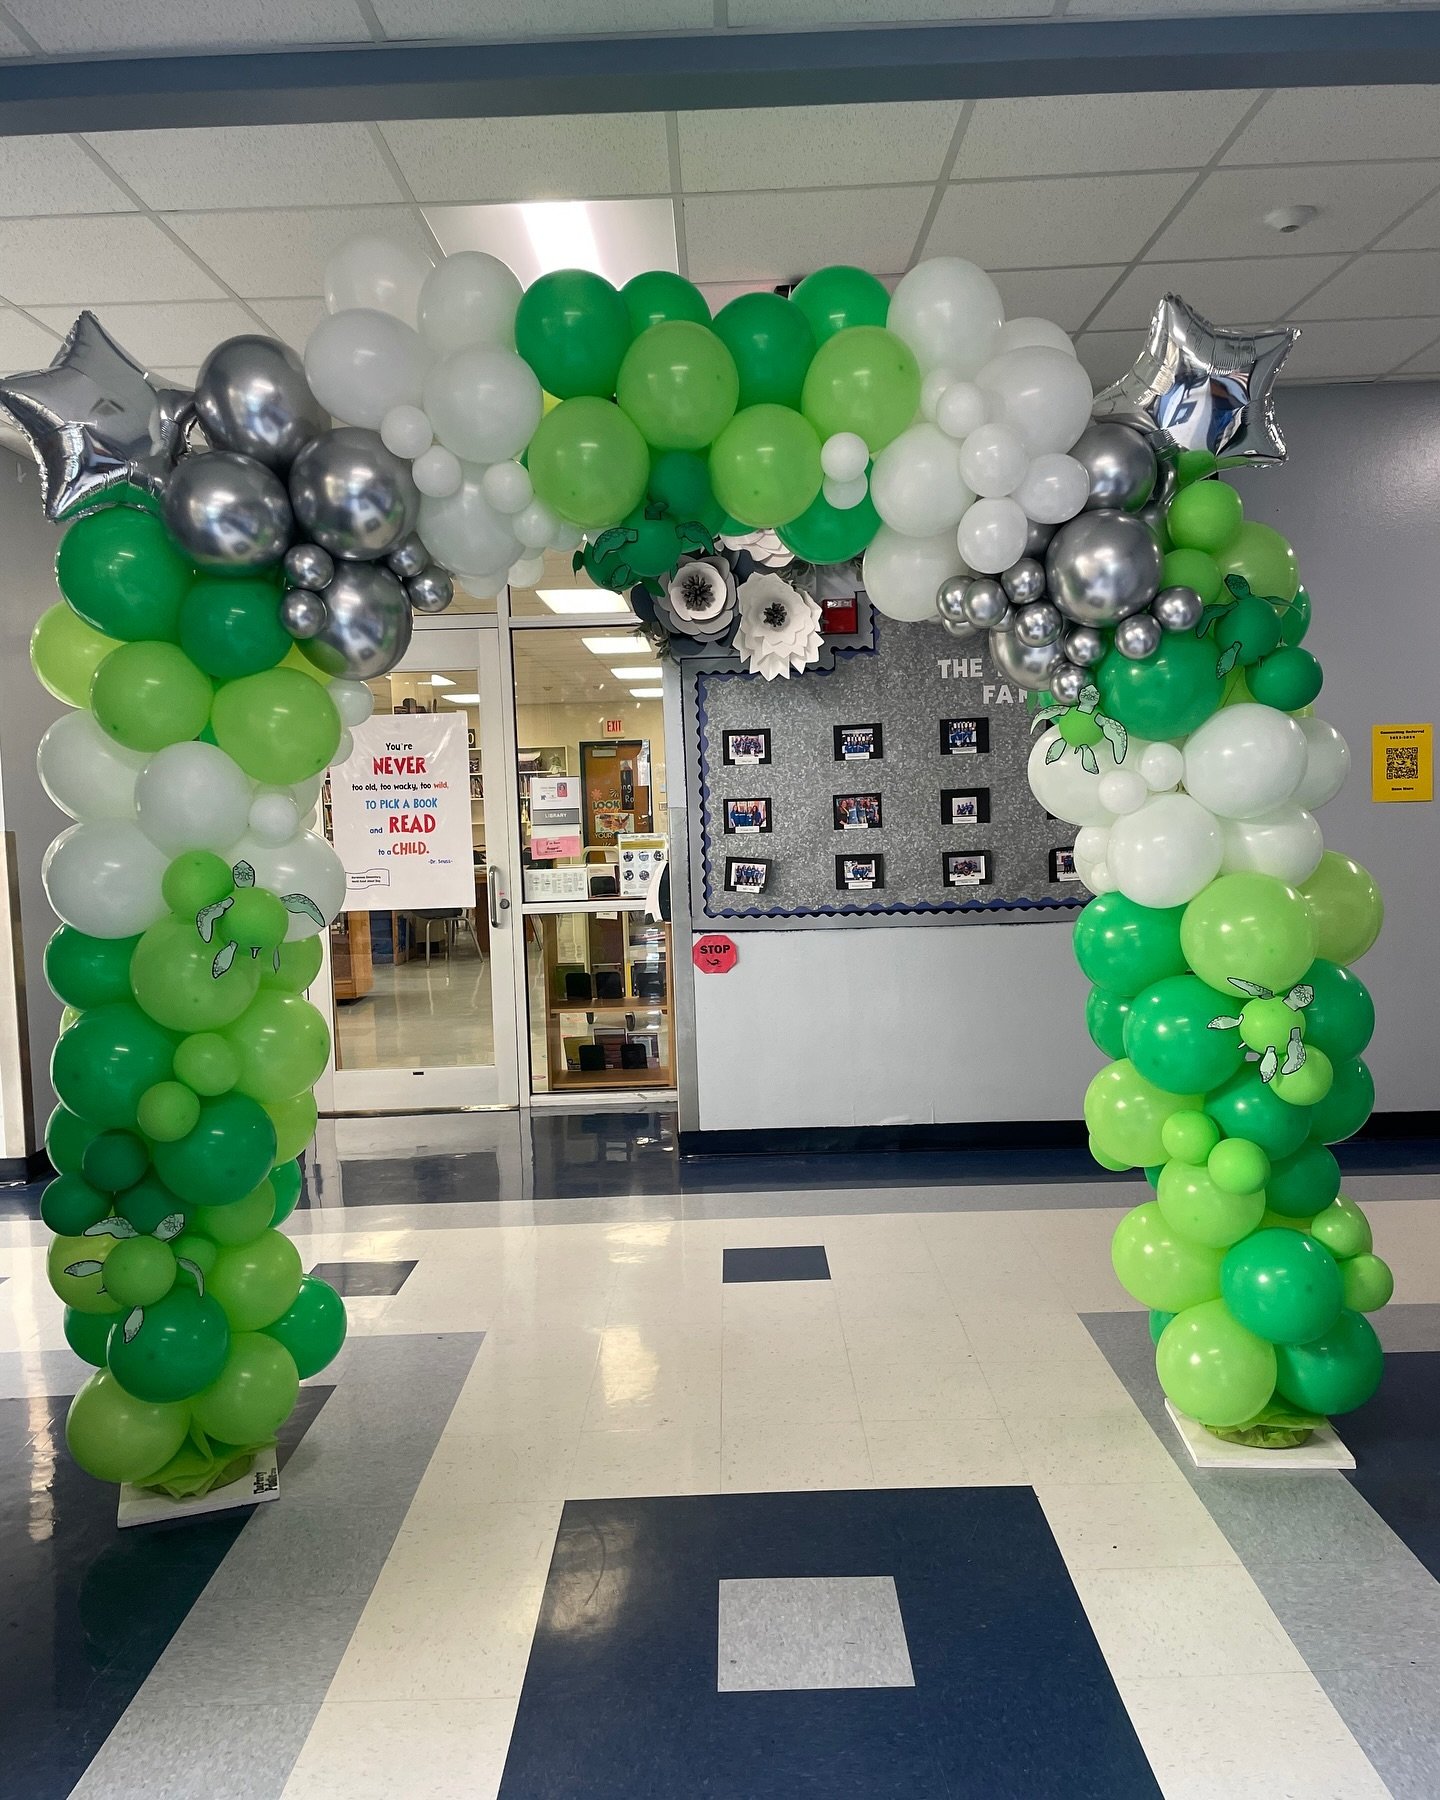 🌱It&rsquo;s Easy Being Green🌱

This lovely square arch was the perfect addition to an elementary school entry way ✏️

We&rsquo;re able to design, deliver and setup your vision straight to you anywhere in DFW! 🚛💨

Email us to get a customized quot